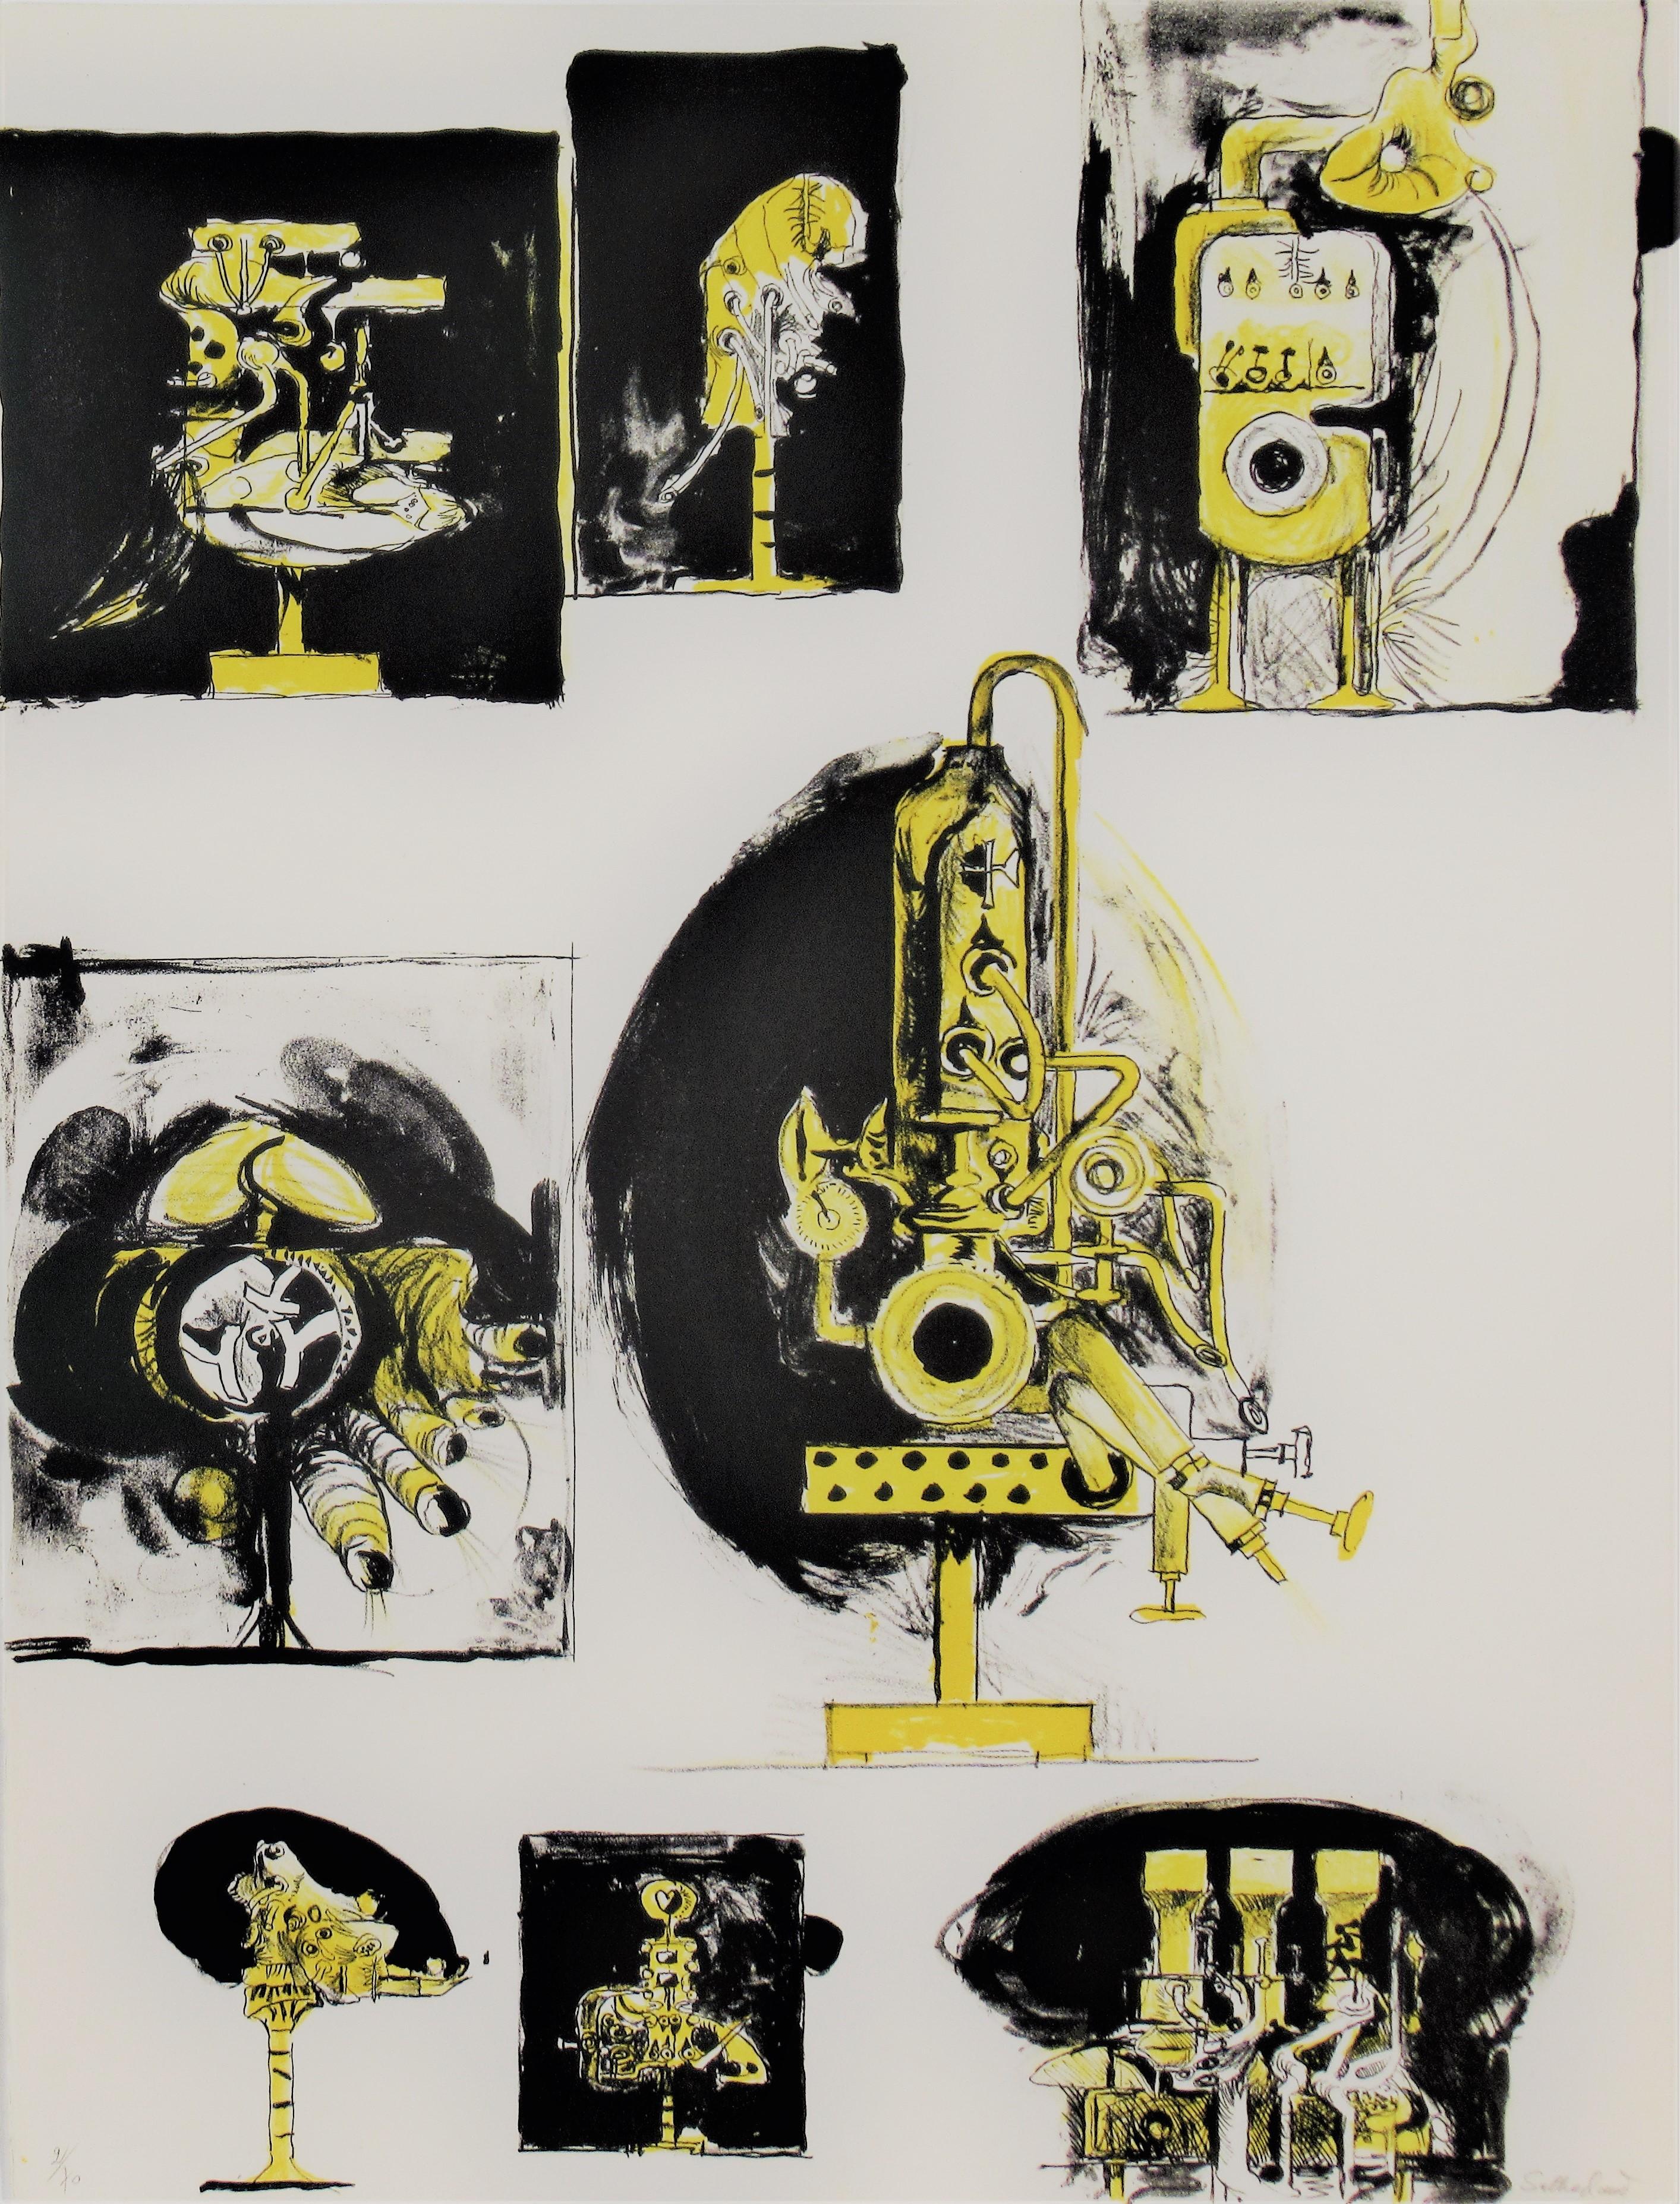 Graham Sutherland Animal Print - "Sheet of Studies" from the suite "Bestiary and some Correspondences" 